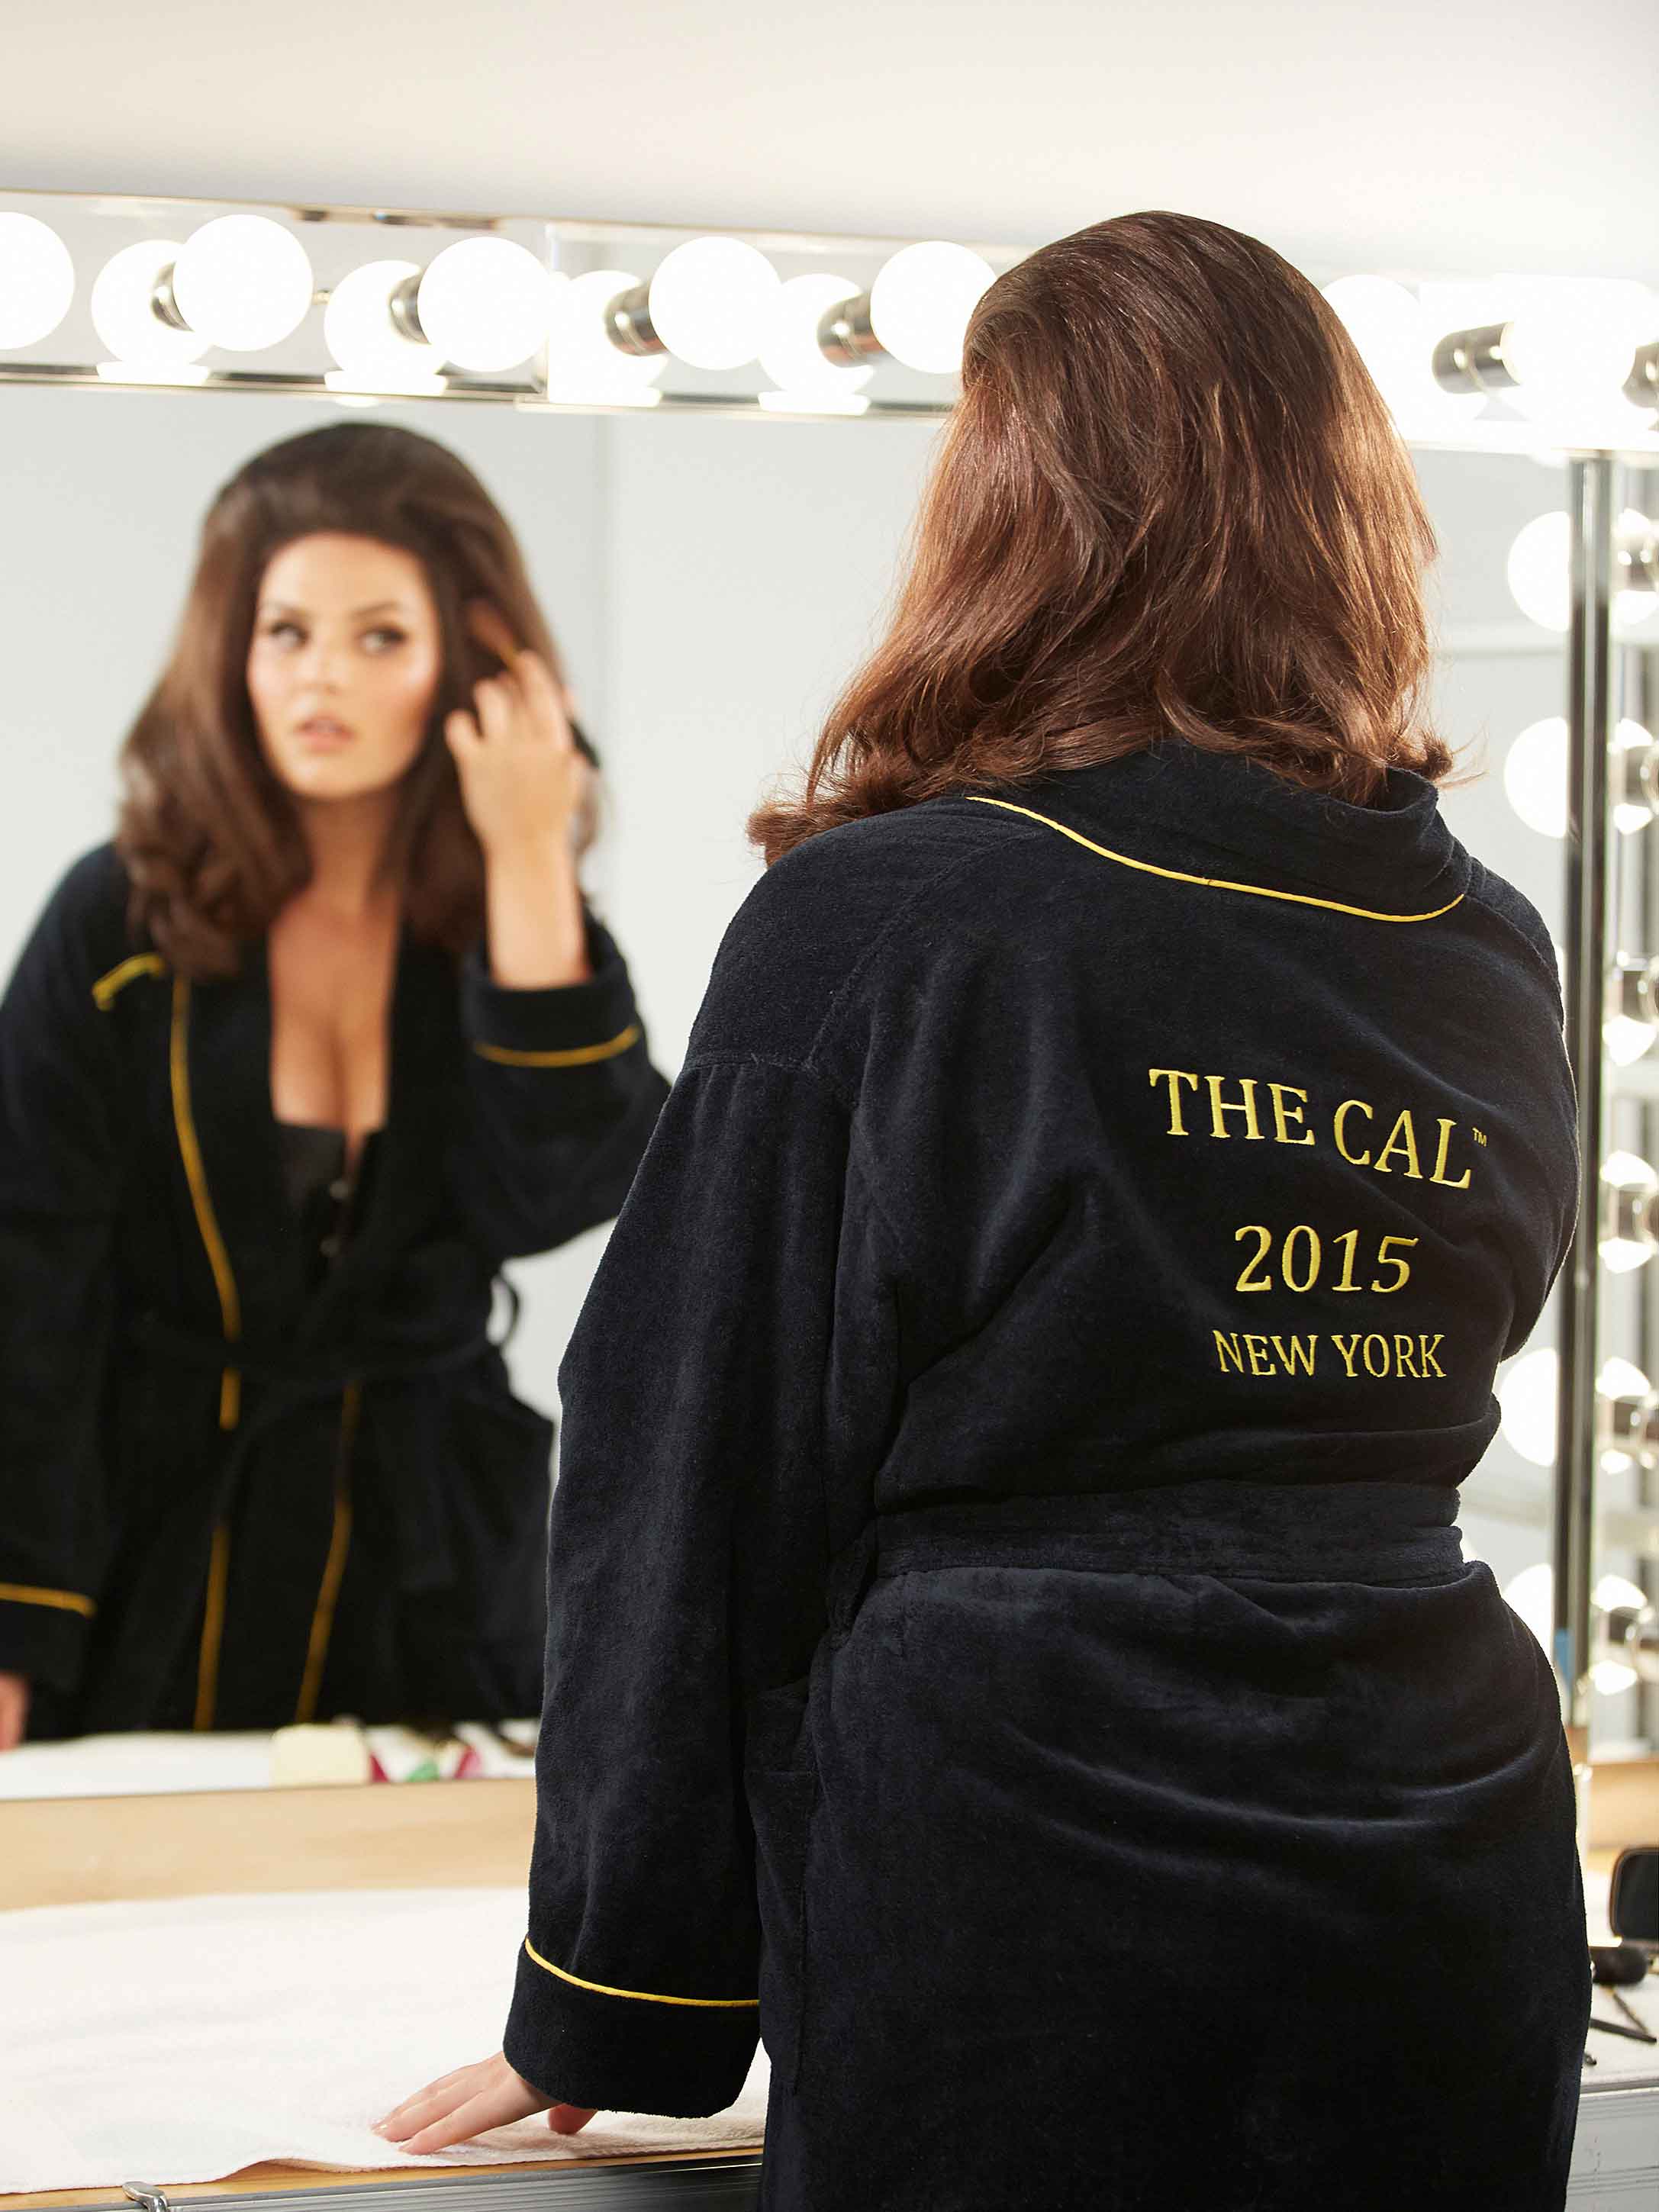 Candice Huffine behind the scenes of the Pirelli 2015 shoot